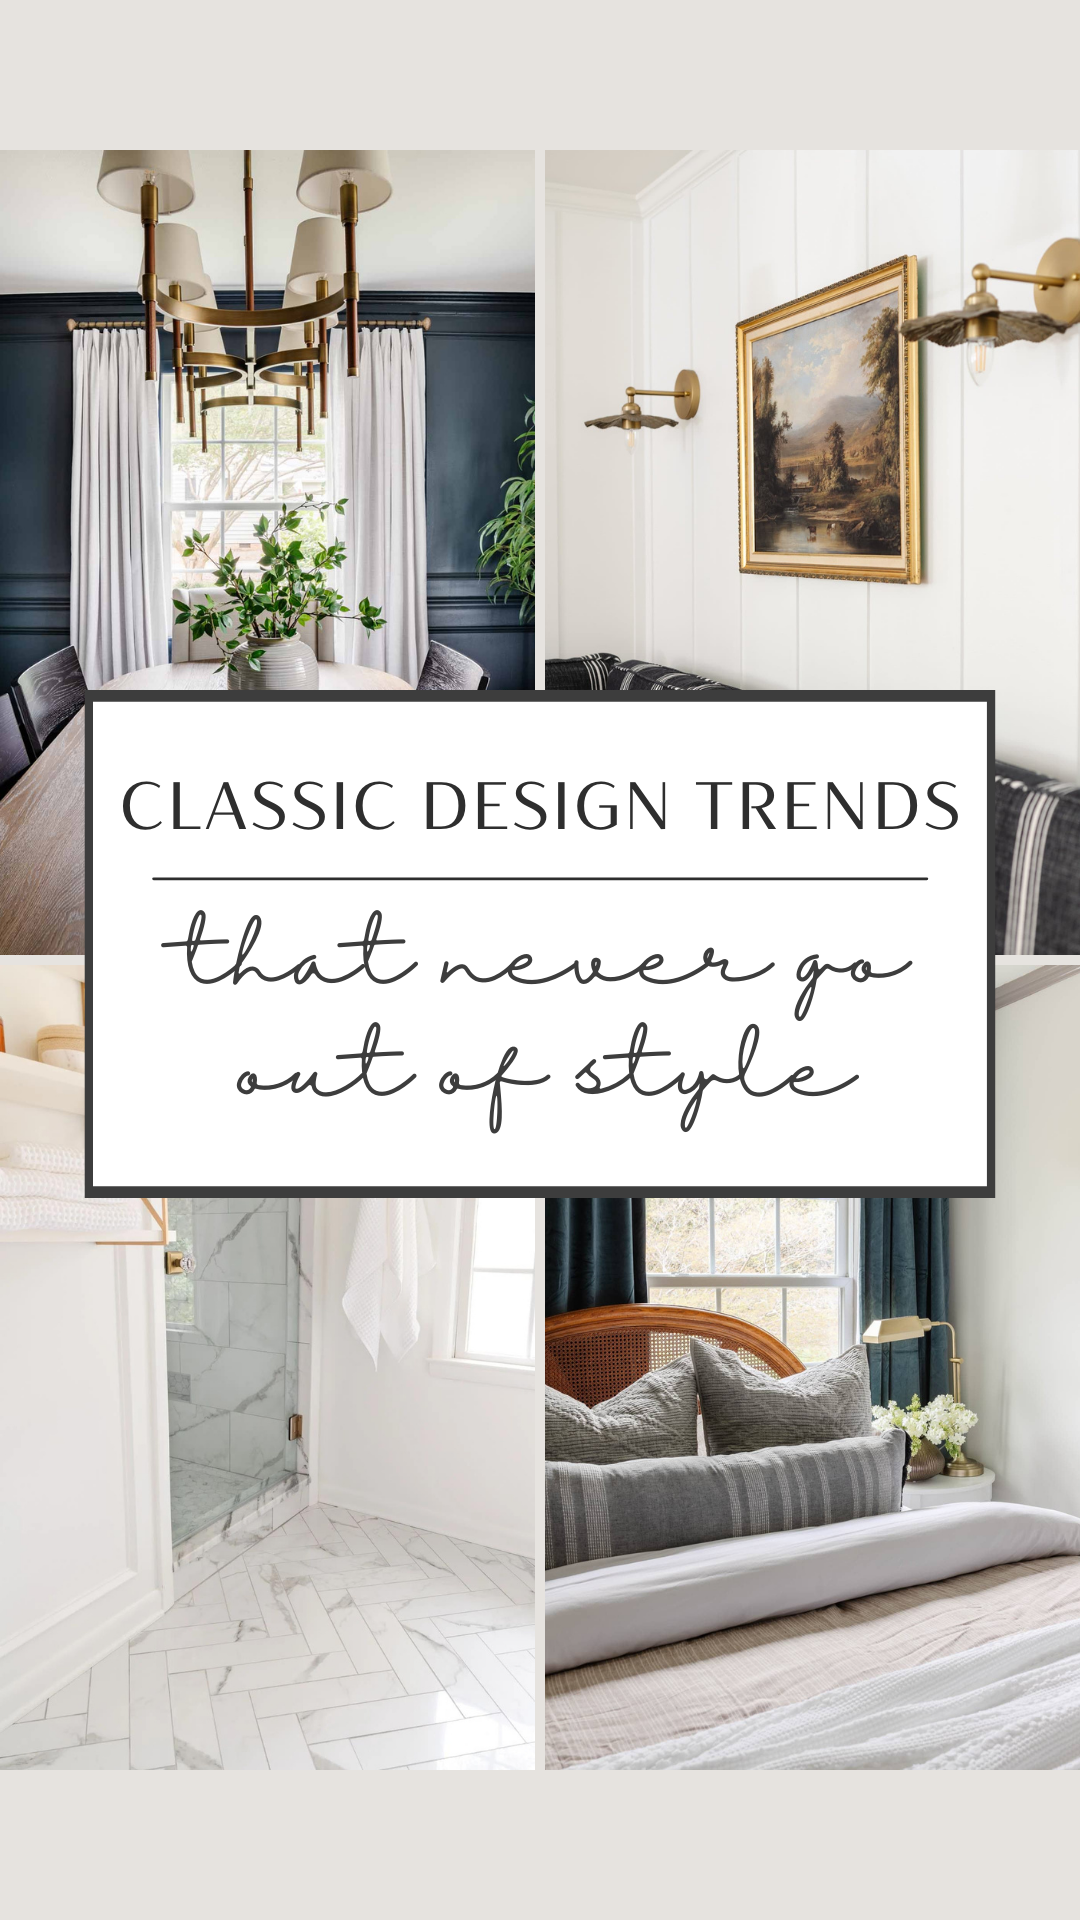 20 Classic Interior Design Trends That Never Go Out of Style